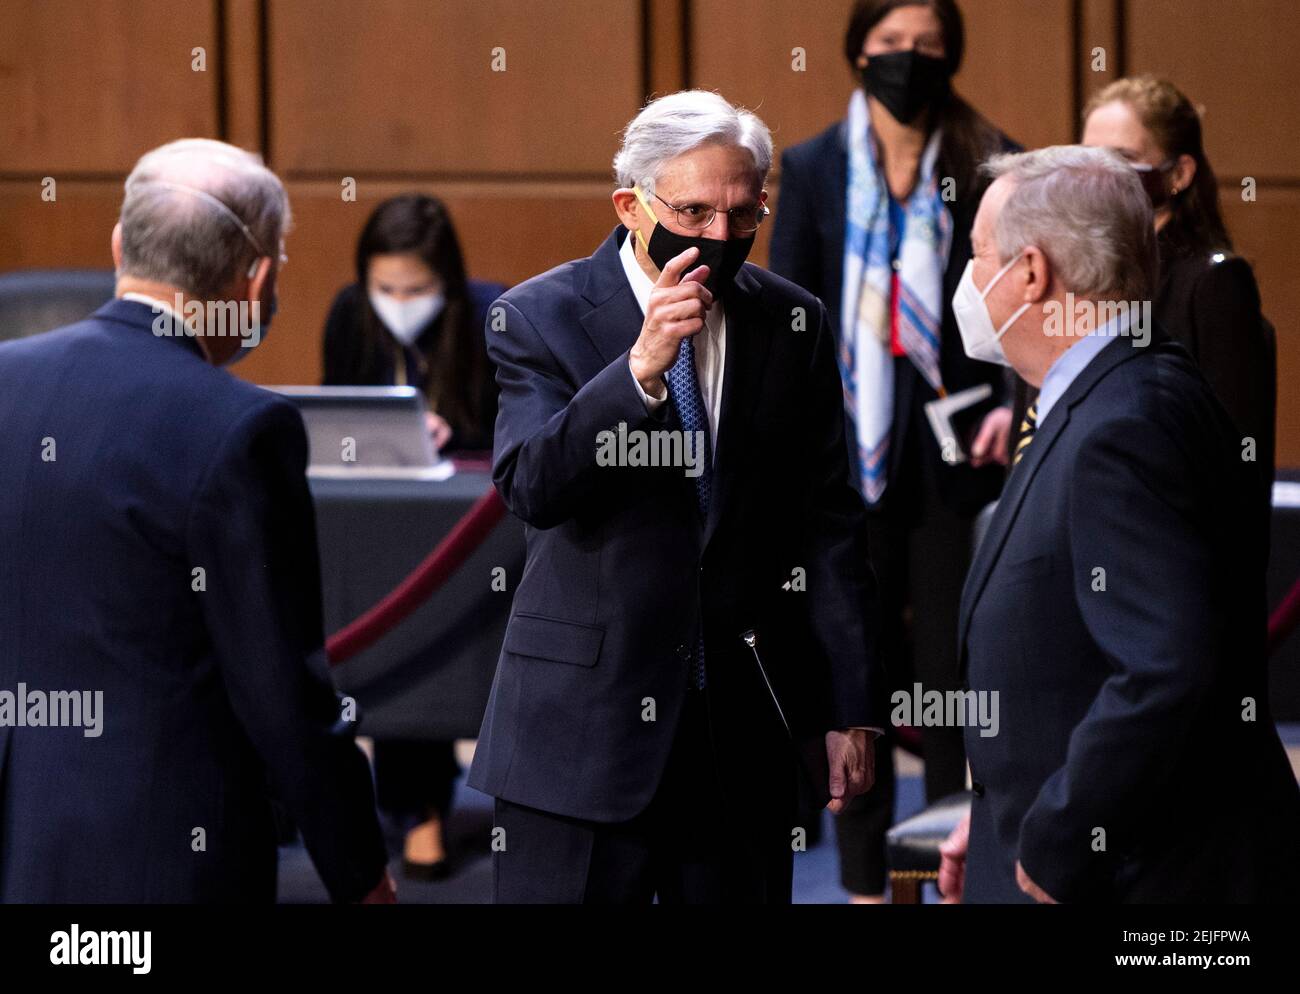 Washington, USA. 22nd Feb, 2021. UNITED STATES - FEBRUARY 22: Merrick Garland, center, nominee to be Attorney General, speaks with ranking member Sen. Chuck Grassley, R-Iowa, and chairman Sen. Richard Durbin, D-Ill., as he arrives for his confirmation hearing in the Senate Judicary Committee on Monday, Feb. 22, 2021. (Photo By Bill Clark/Pool/Sipa USA) Credit: Sipa USA/Alamy Live News Stock Photo